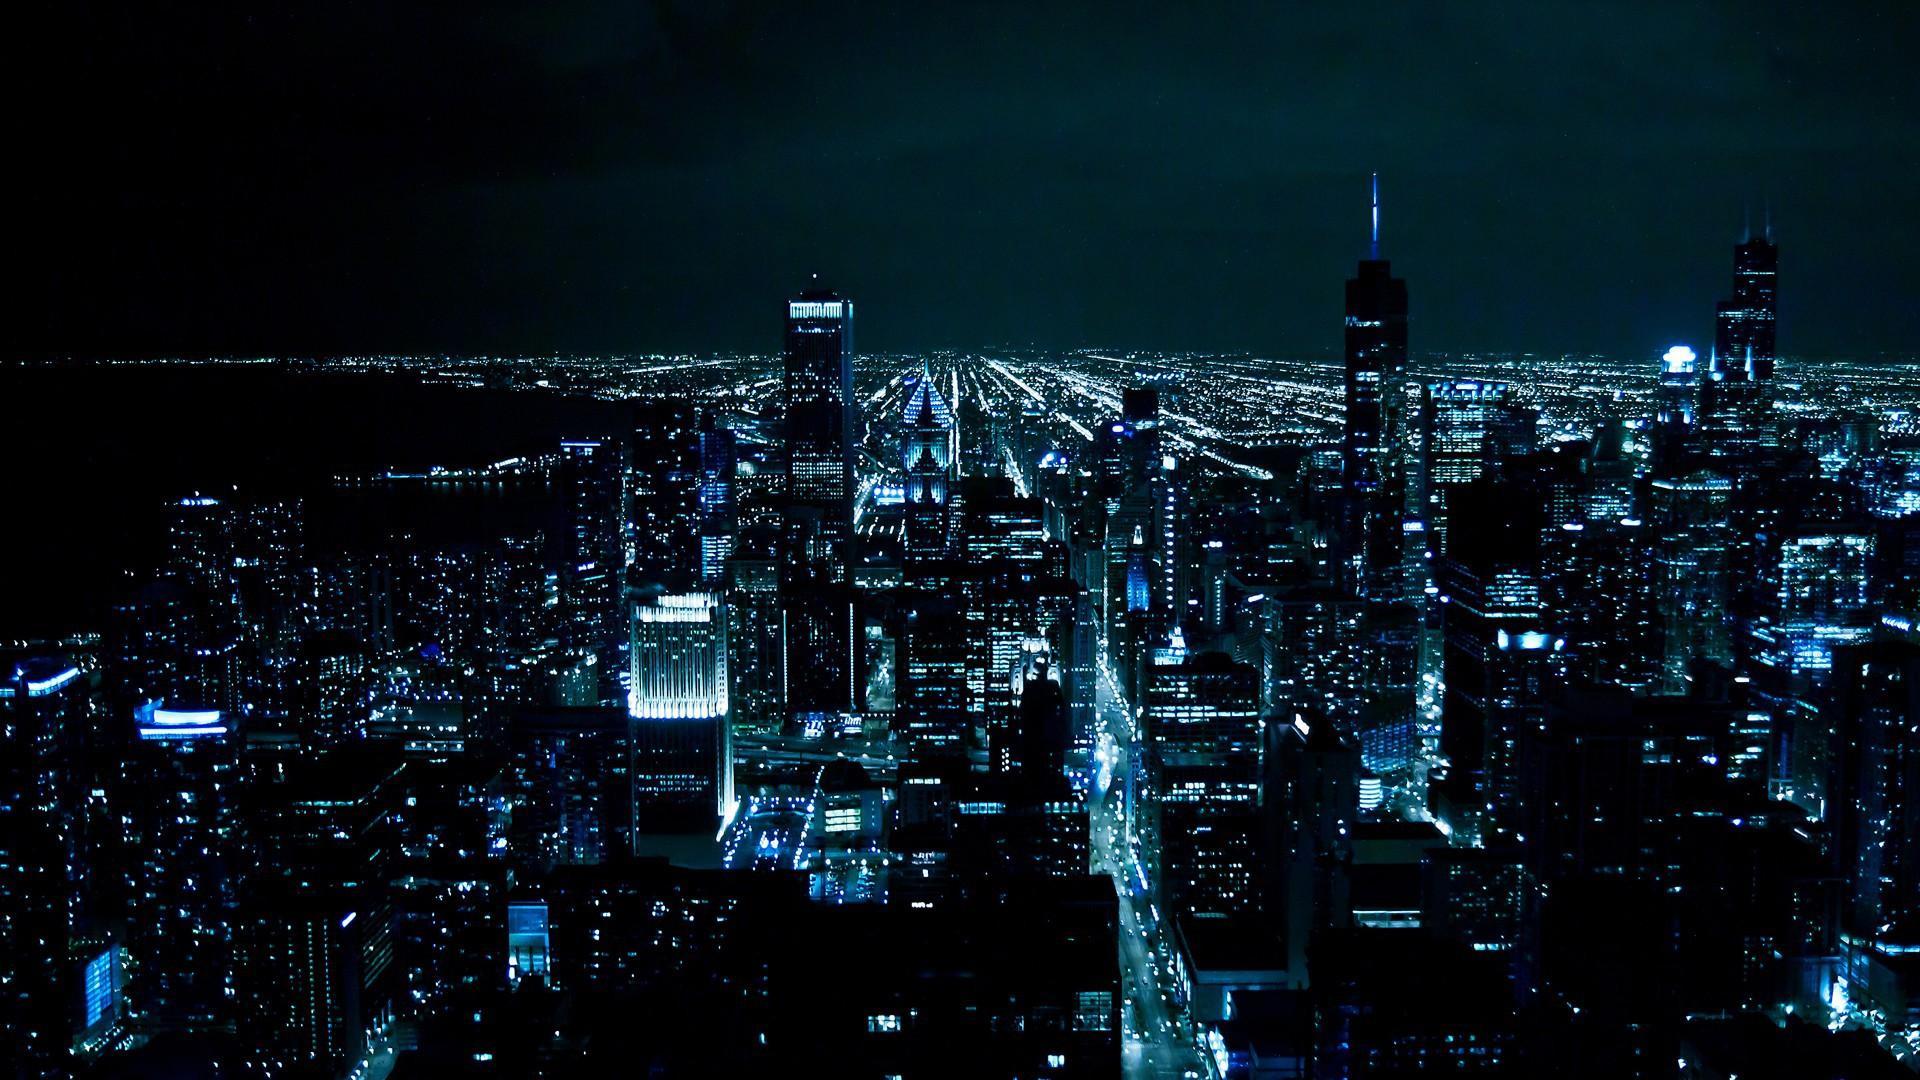 City night. Urban wallpapers for Android - APK Download